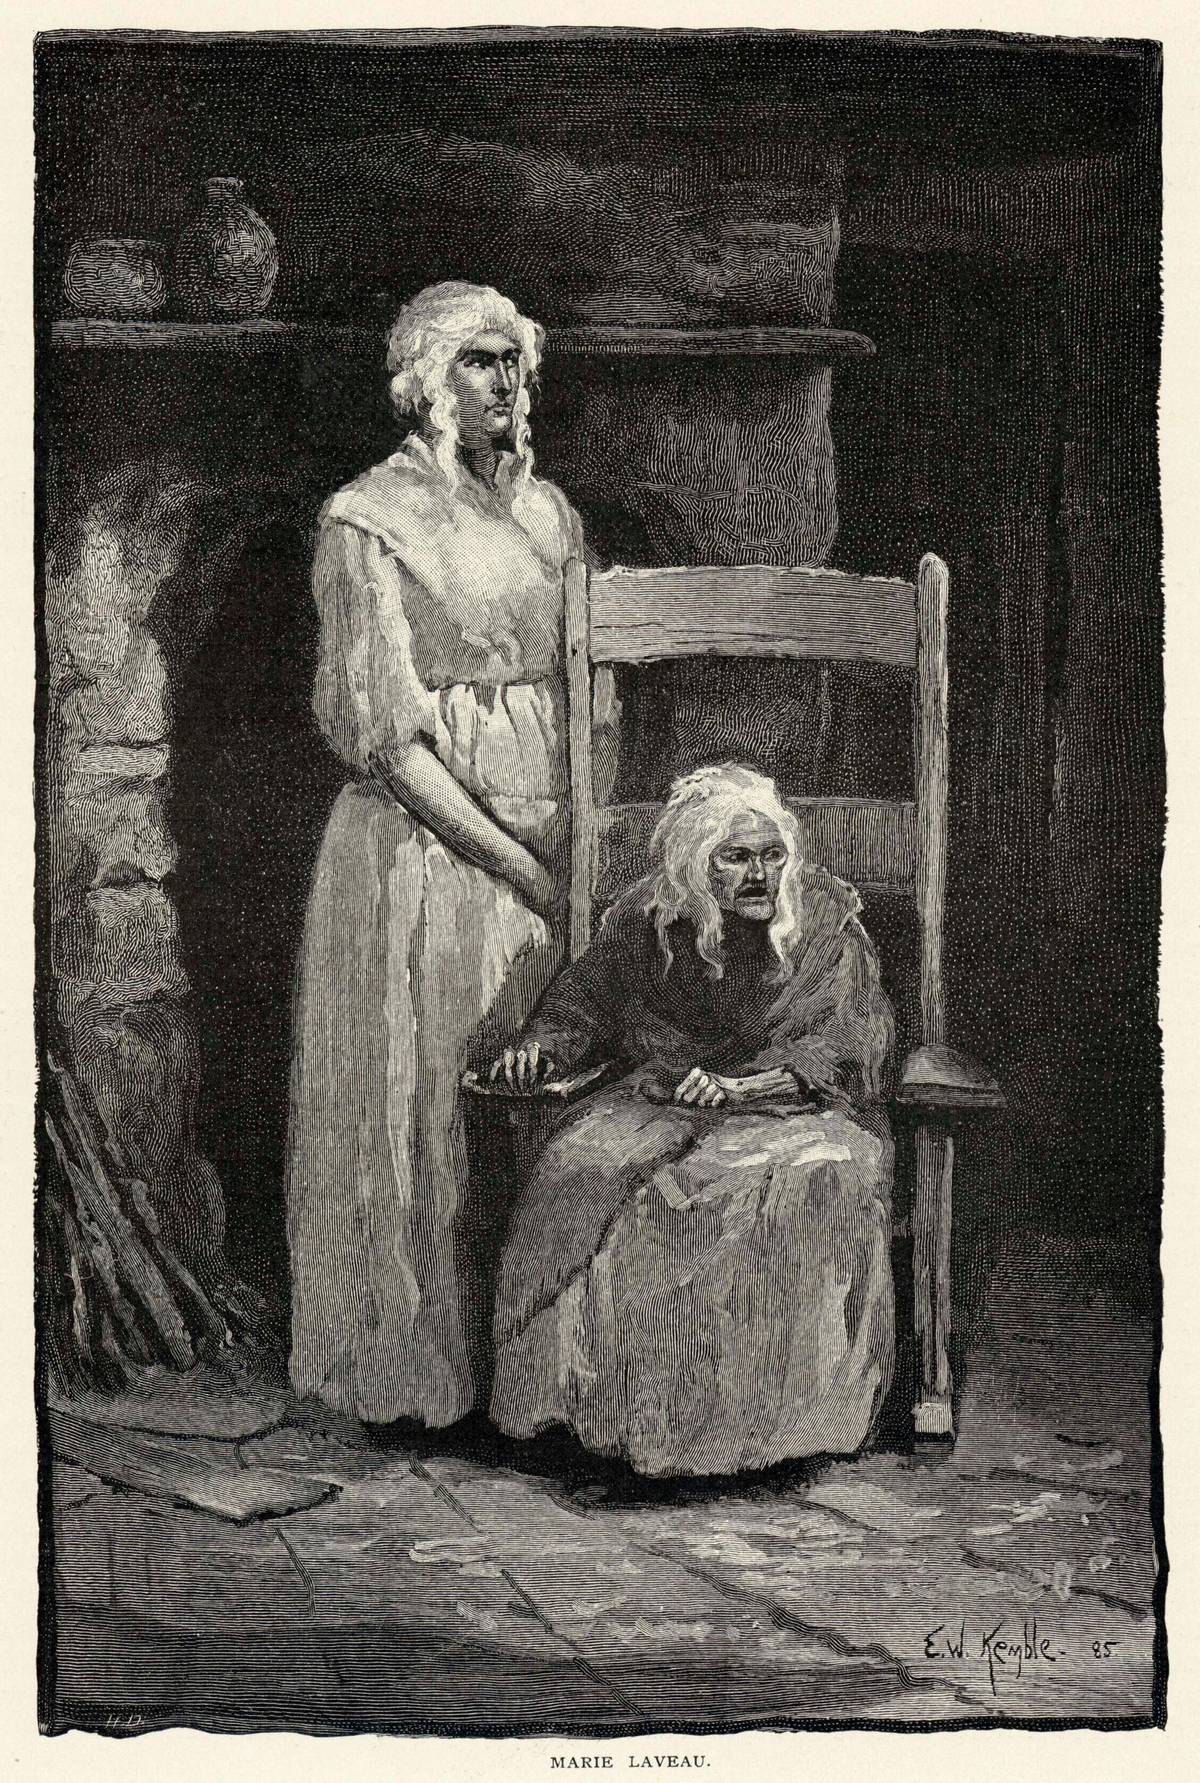 An 1886 etching of Marie Laveau, seated, supposedly during the last year of her life